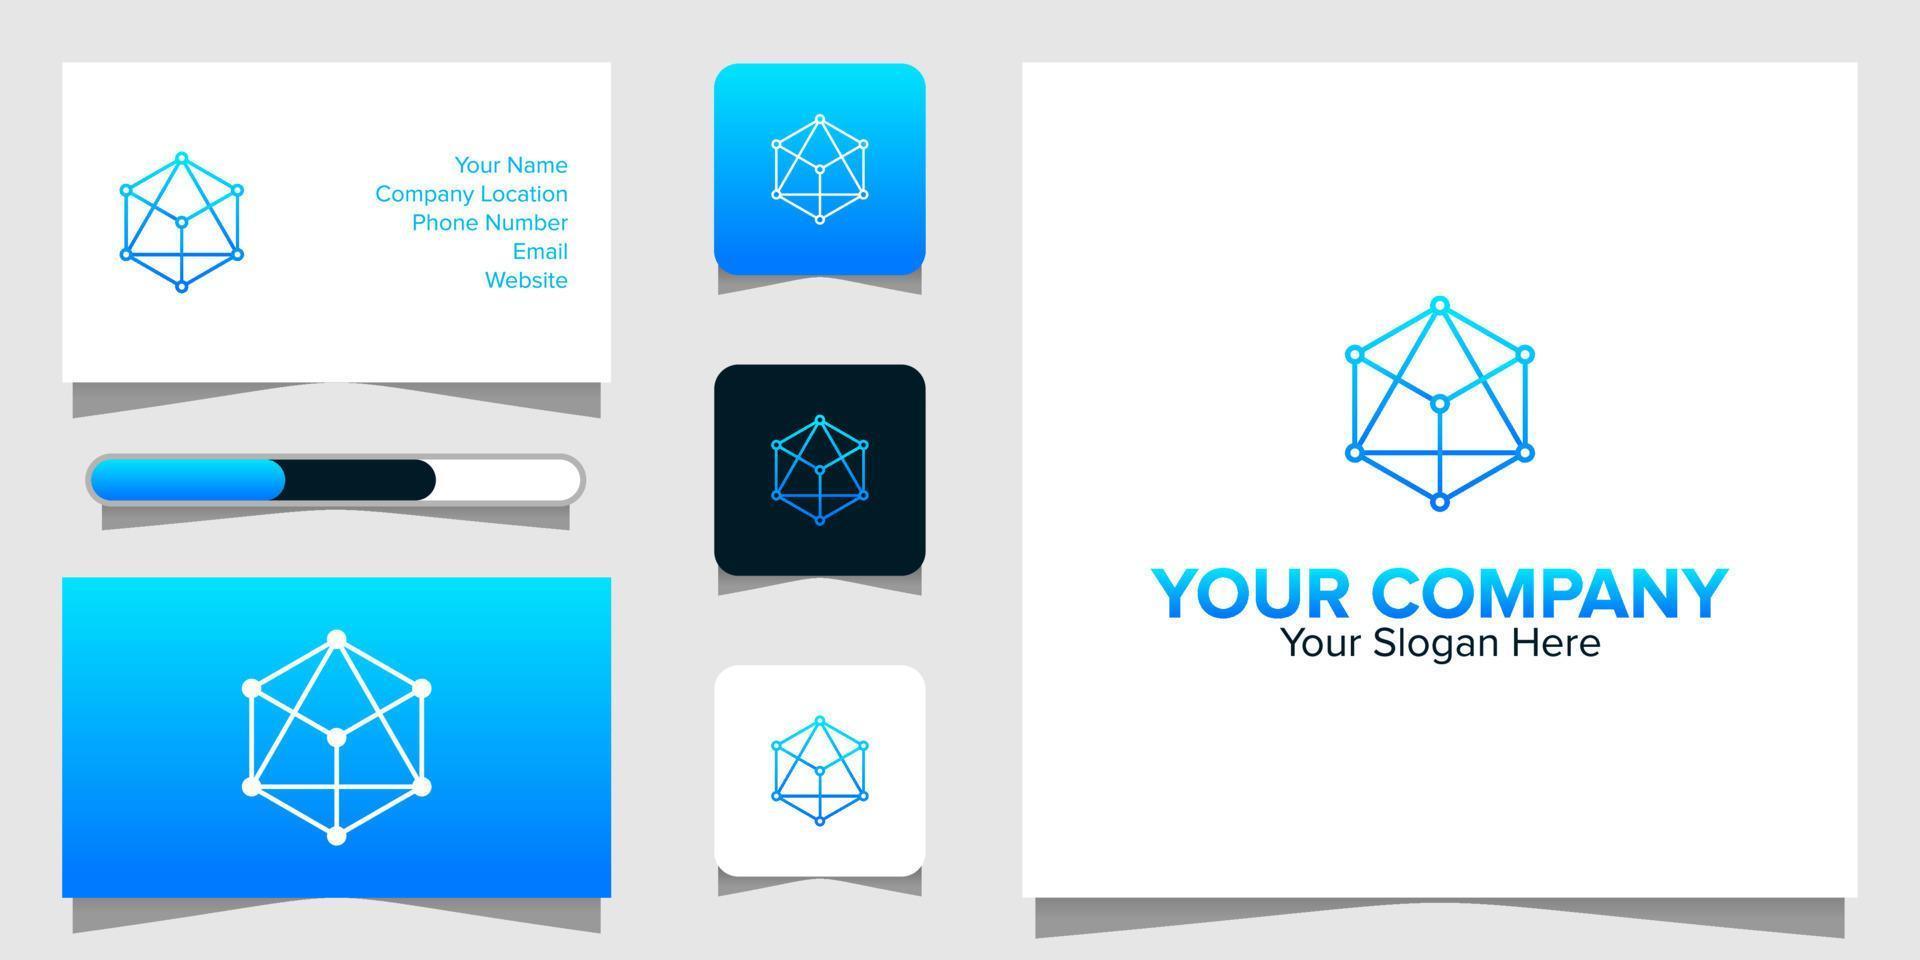 Illustration Vector Graphic of Hexagon Technology logo and business card